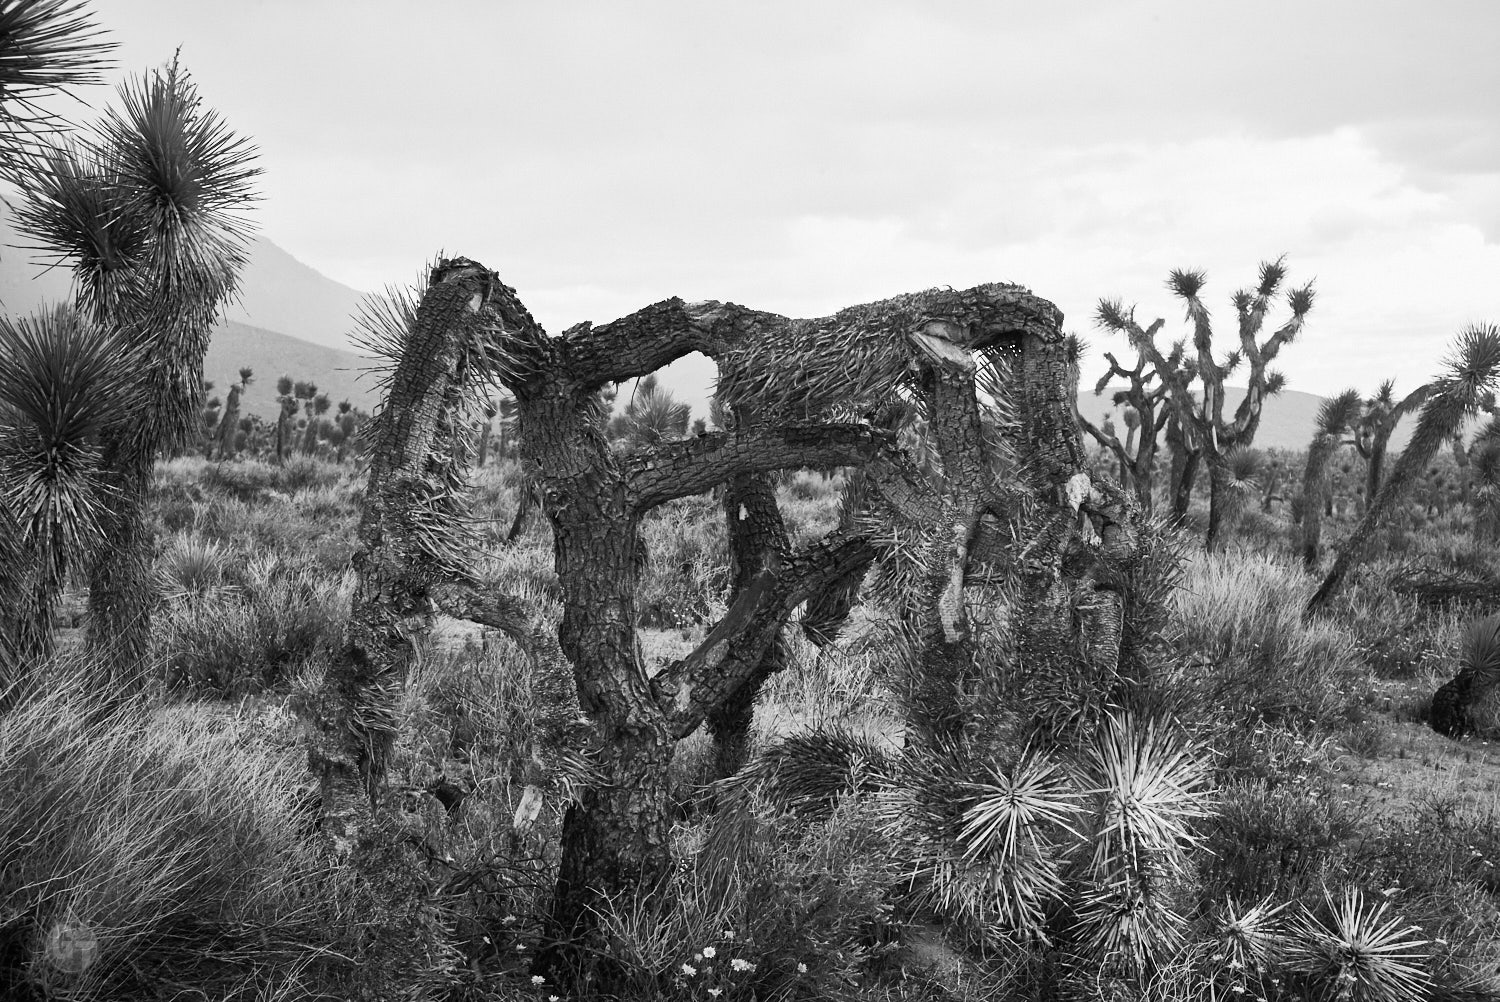 Old Joshua Tree, East of Lake Isabell, CA 